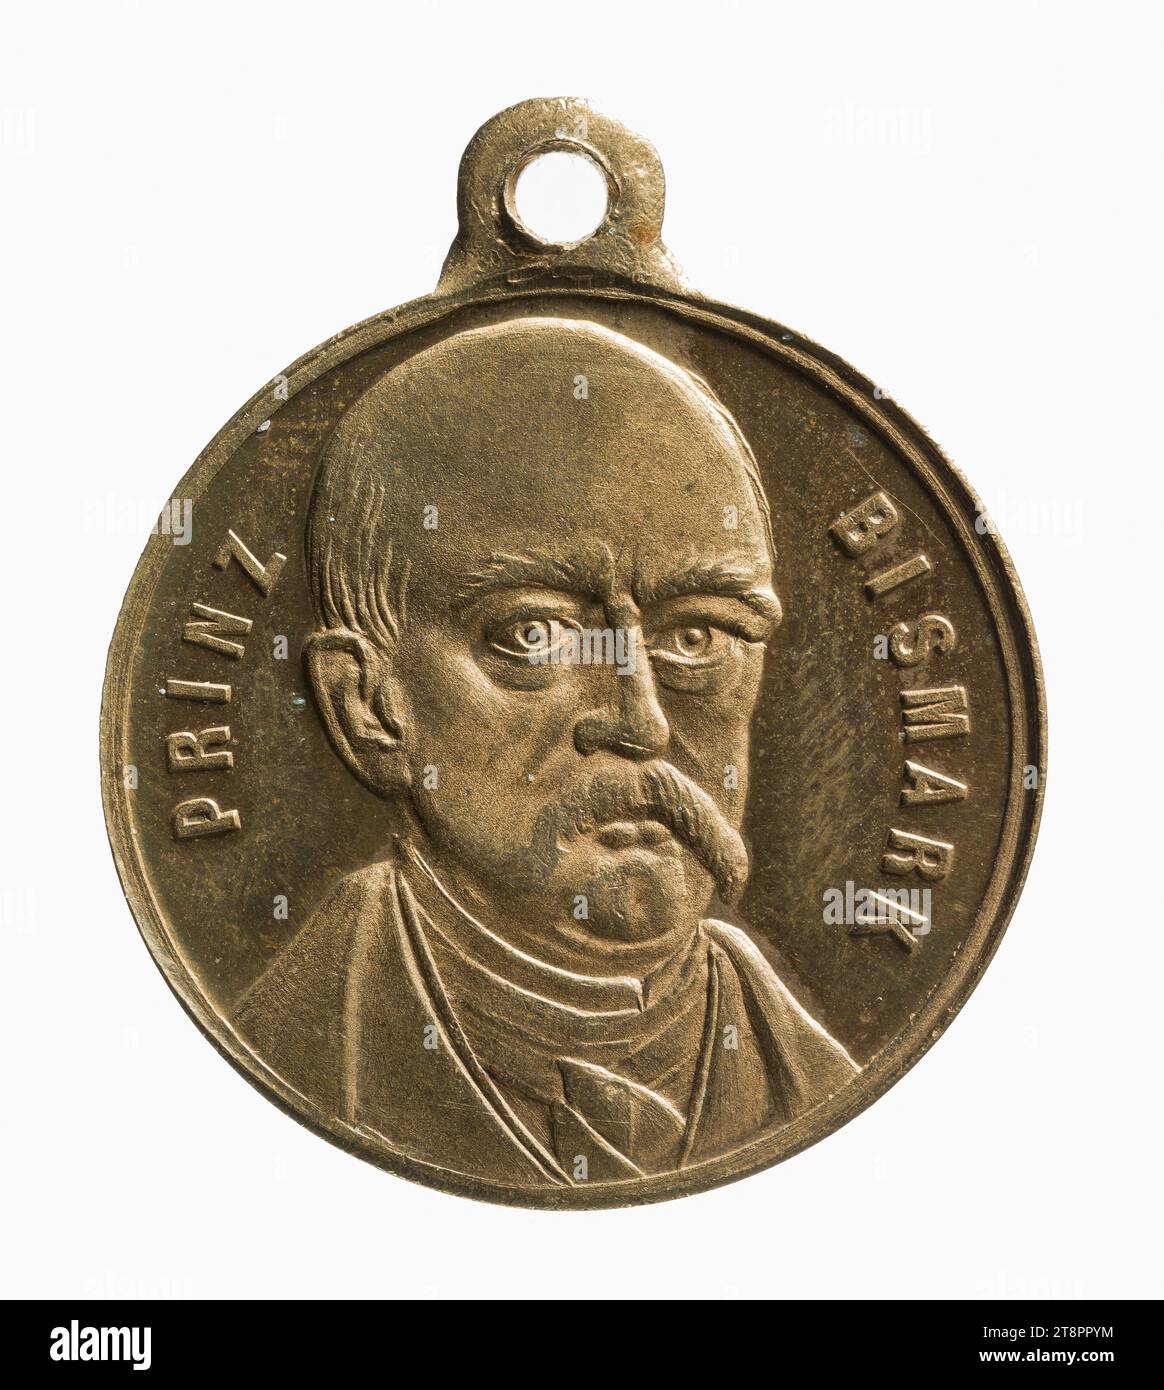 Adolphe Thiers, Head of the Executive (1797-1877) and Otto von Bismarck, Prussian and later German Chancellor (1815-1898), 1871, Anonymous, Medal Engraver, In 1871, 19th century, Numismatic, Medal, Brass, Sizes - Worked: Diameter: 2.4 cm, Weight (type size): 5.99 g Stock Photo